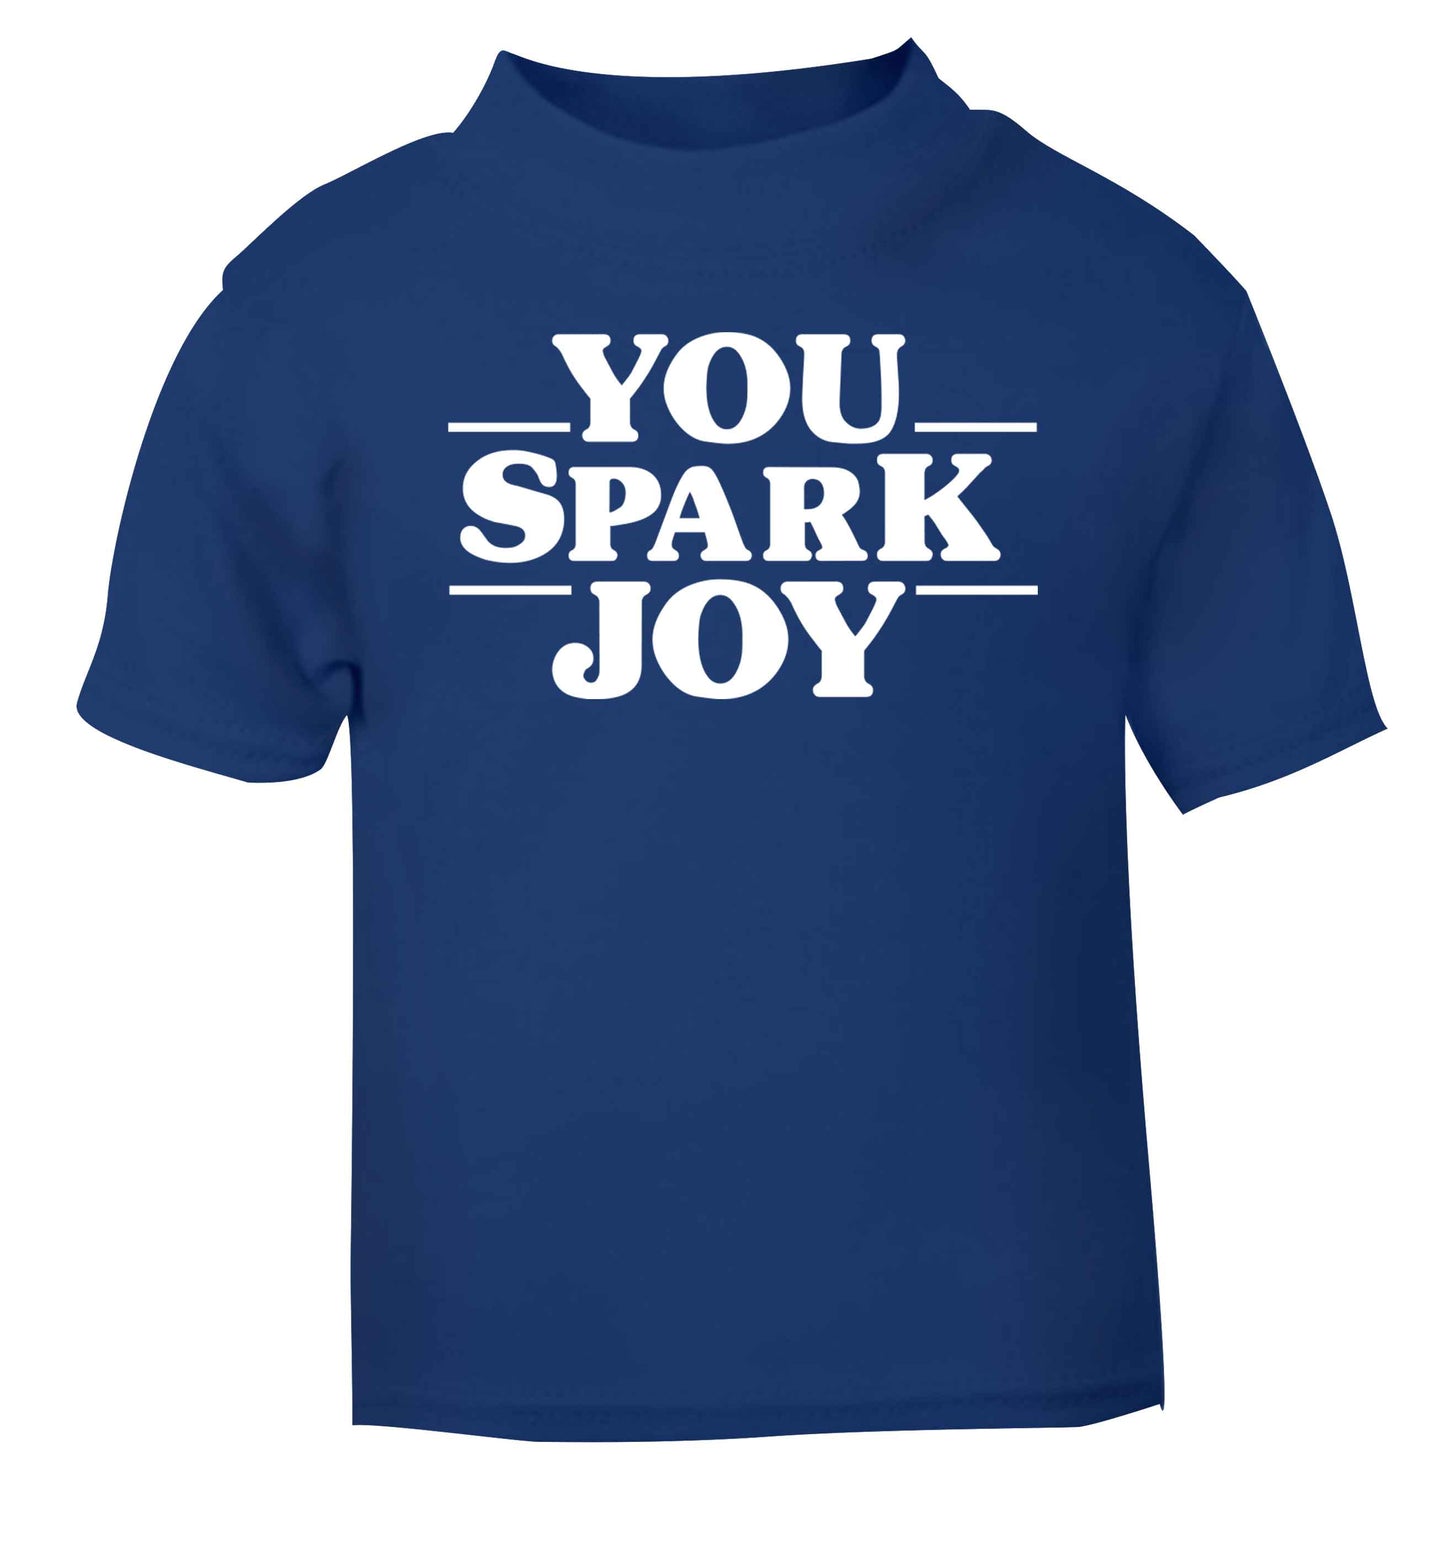 You spark joy blue baby toddler Tshirt 2 Years